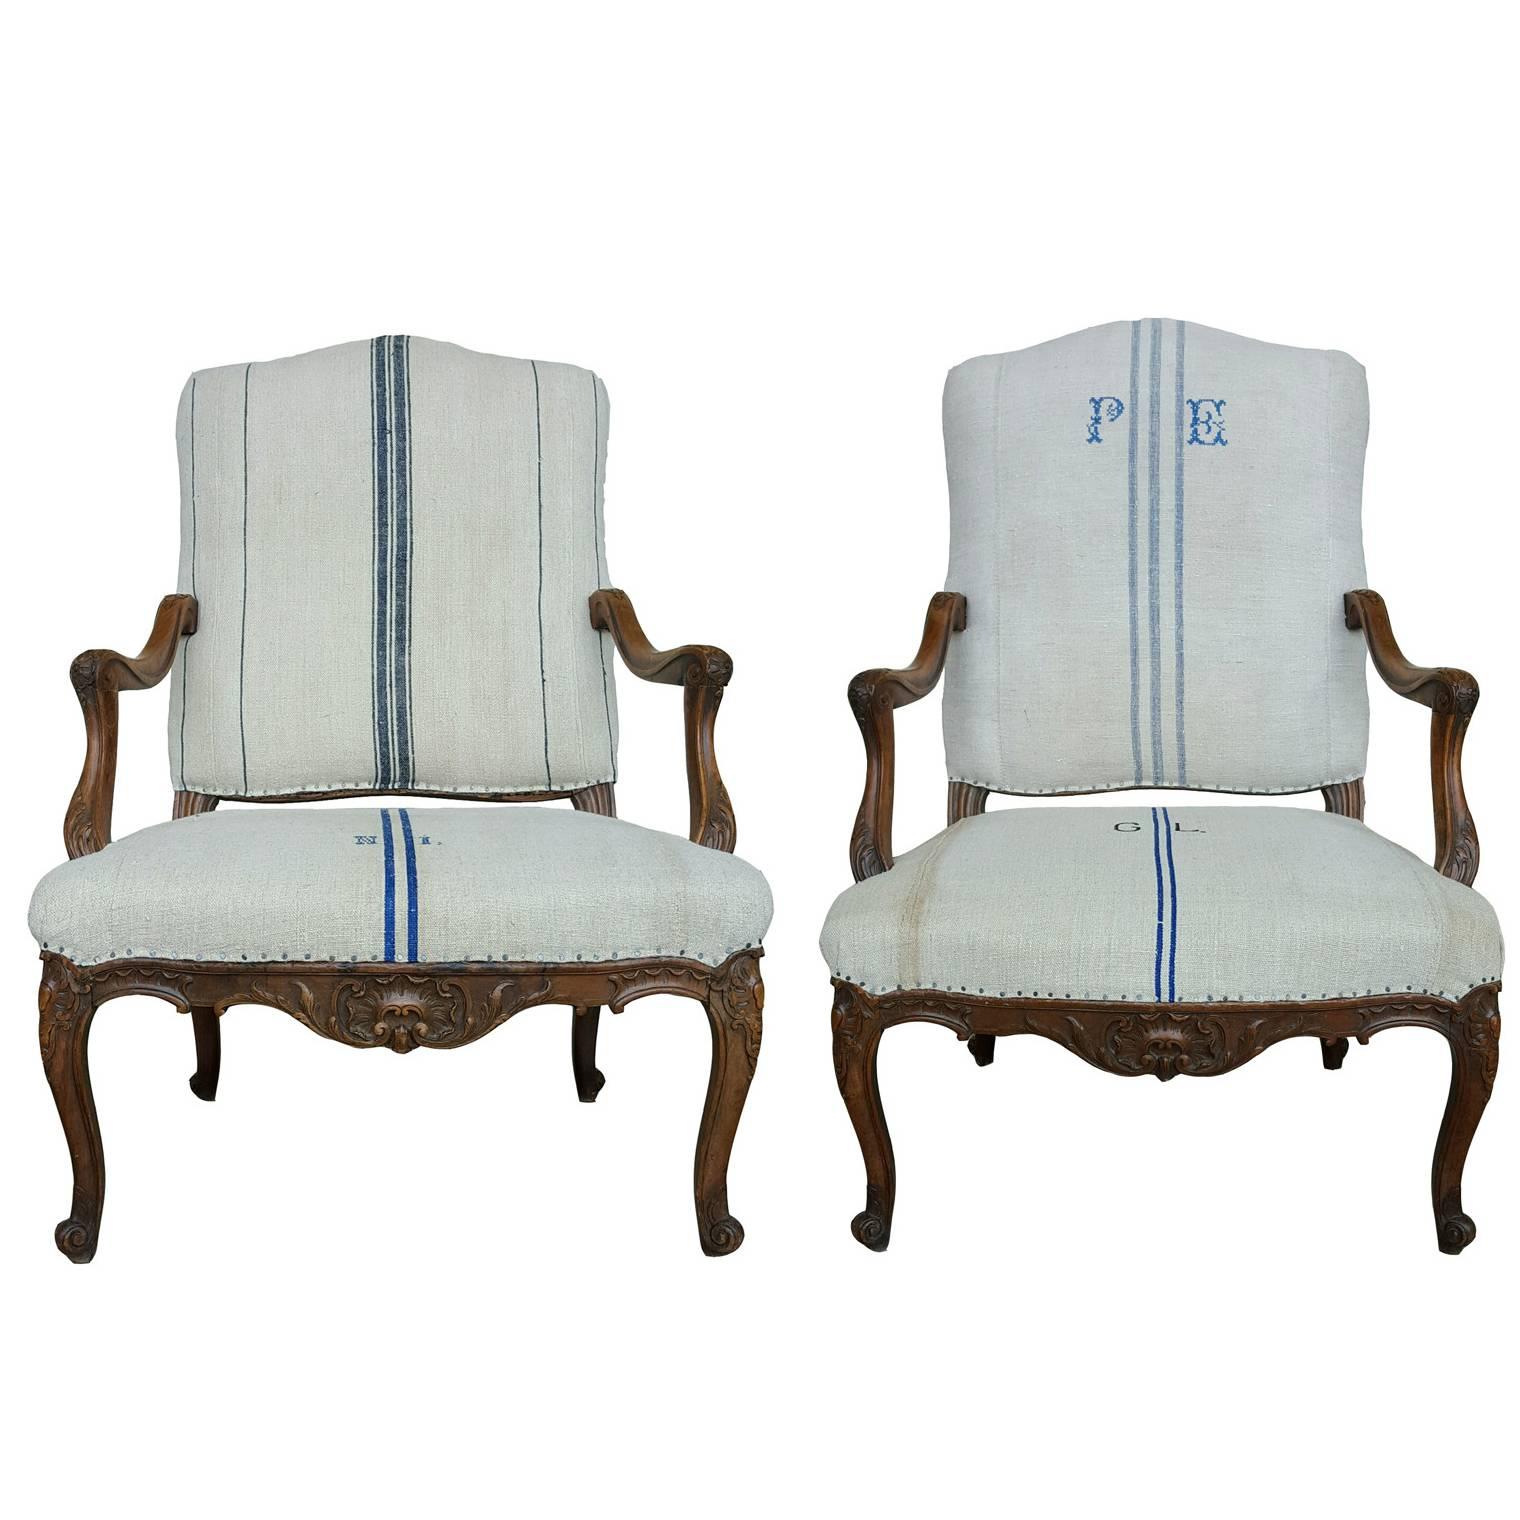 Pair of French Regency Style Walnut Armchairs